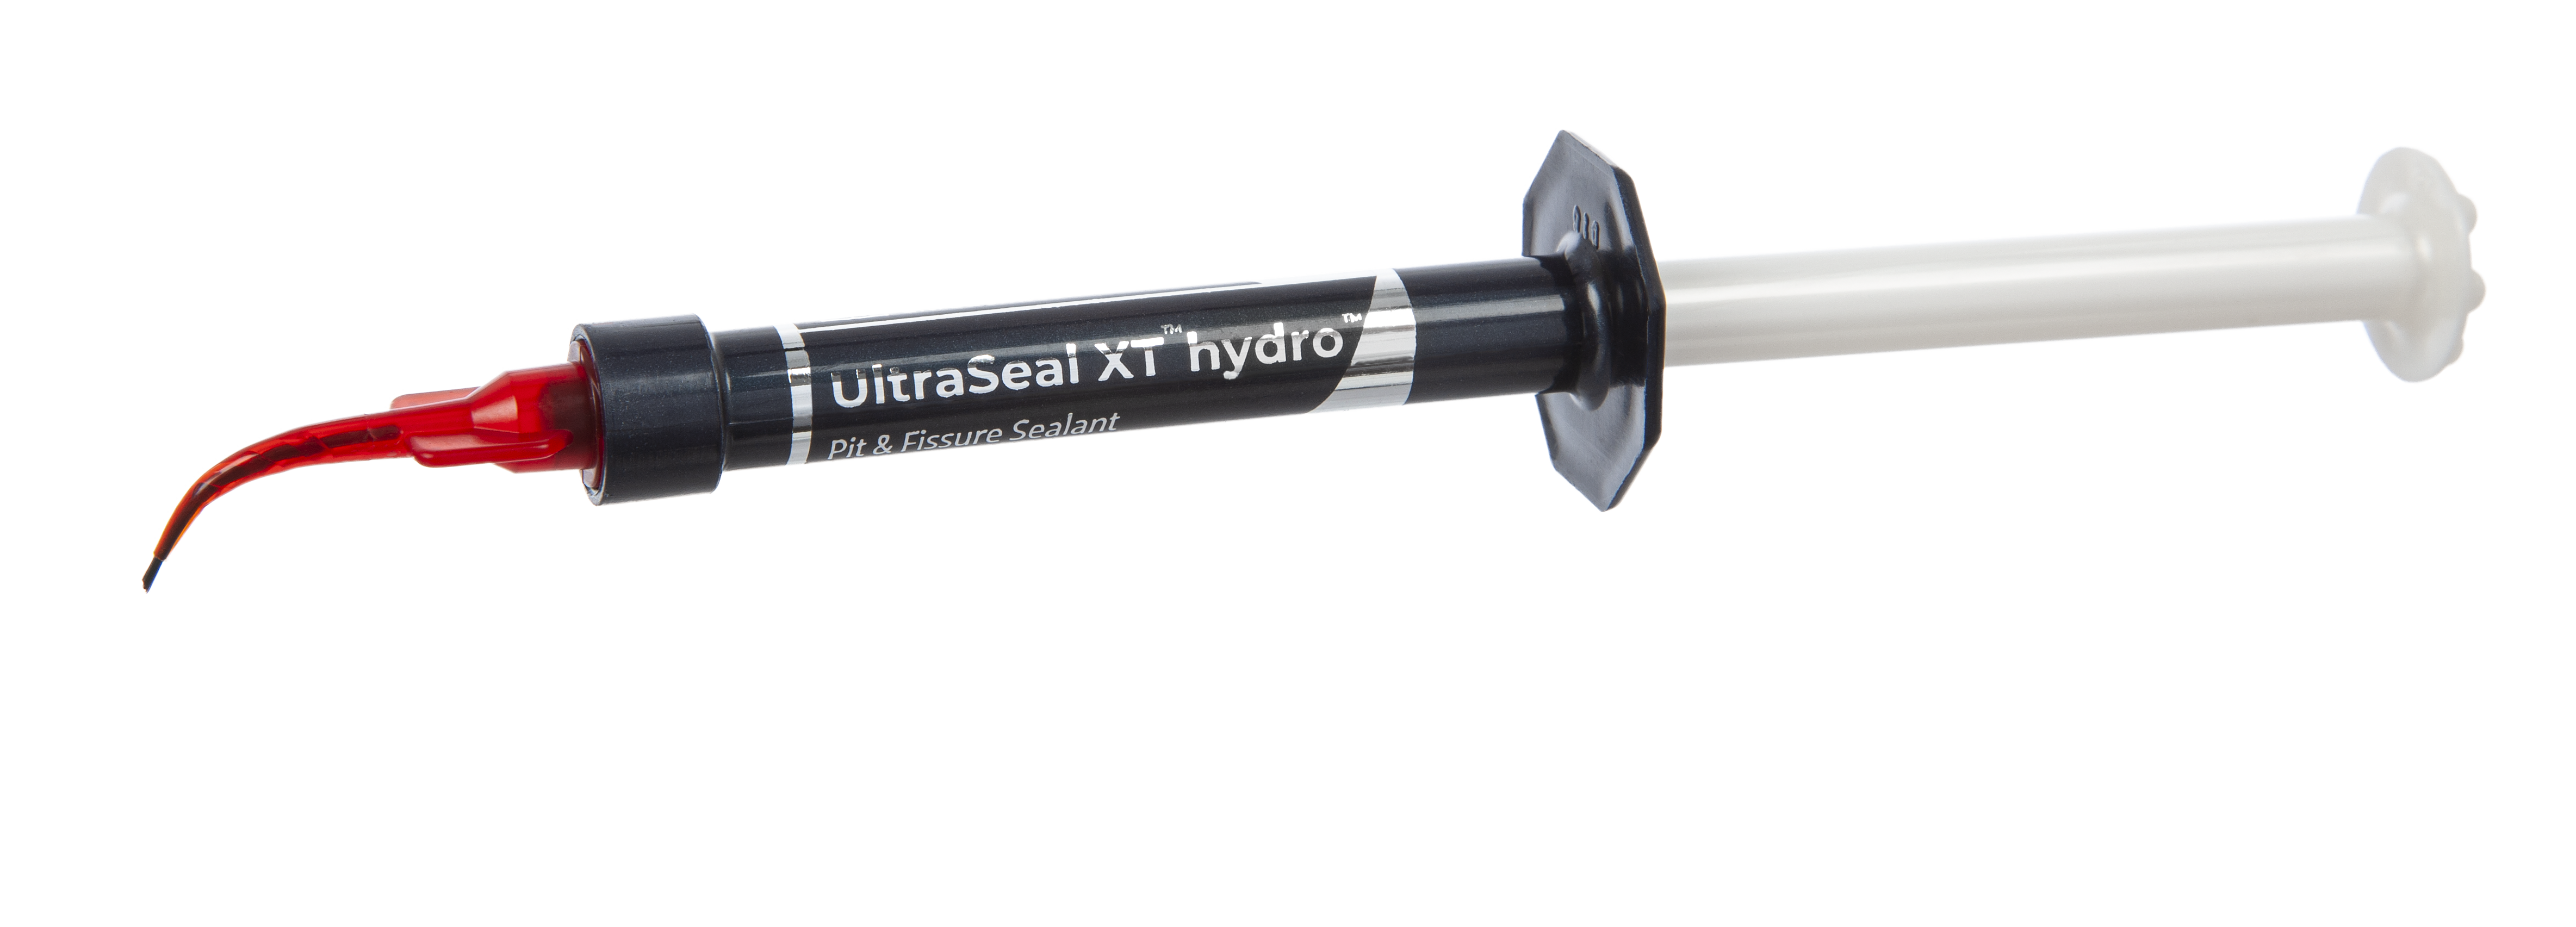 UltraSeal XT hydro syringe with tip 1